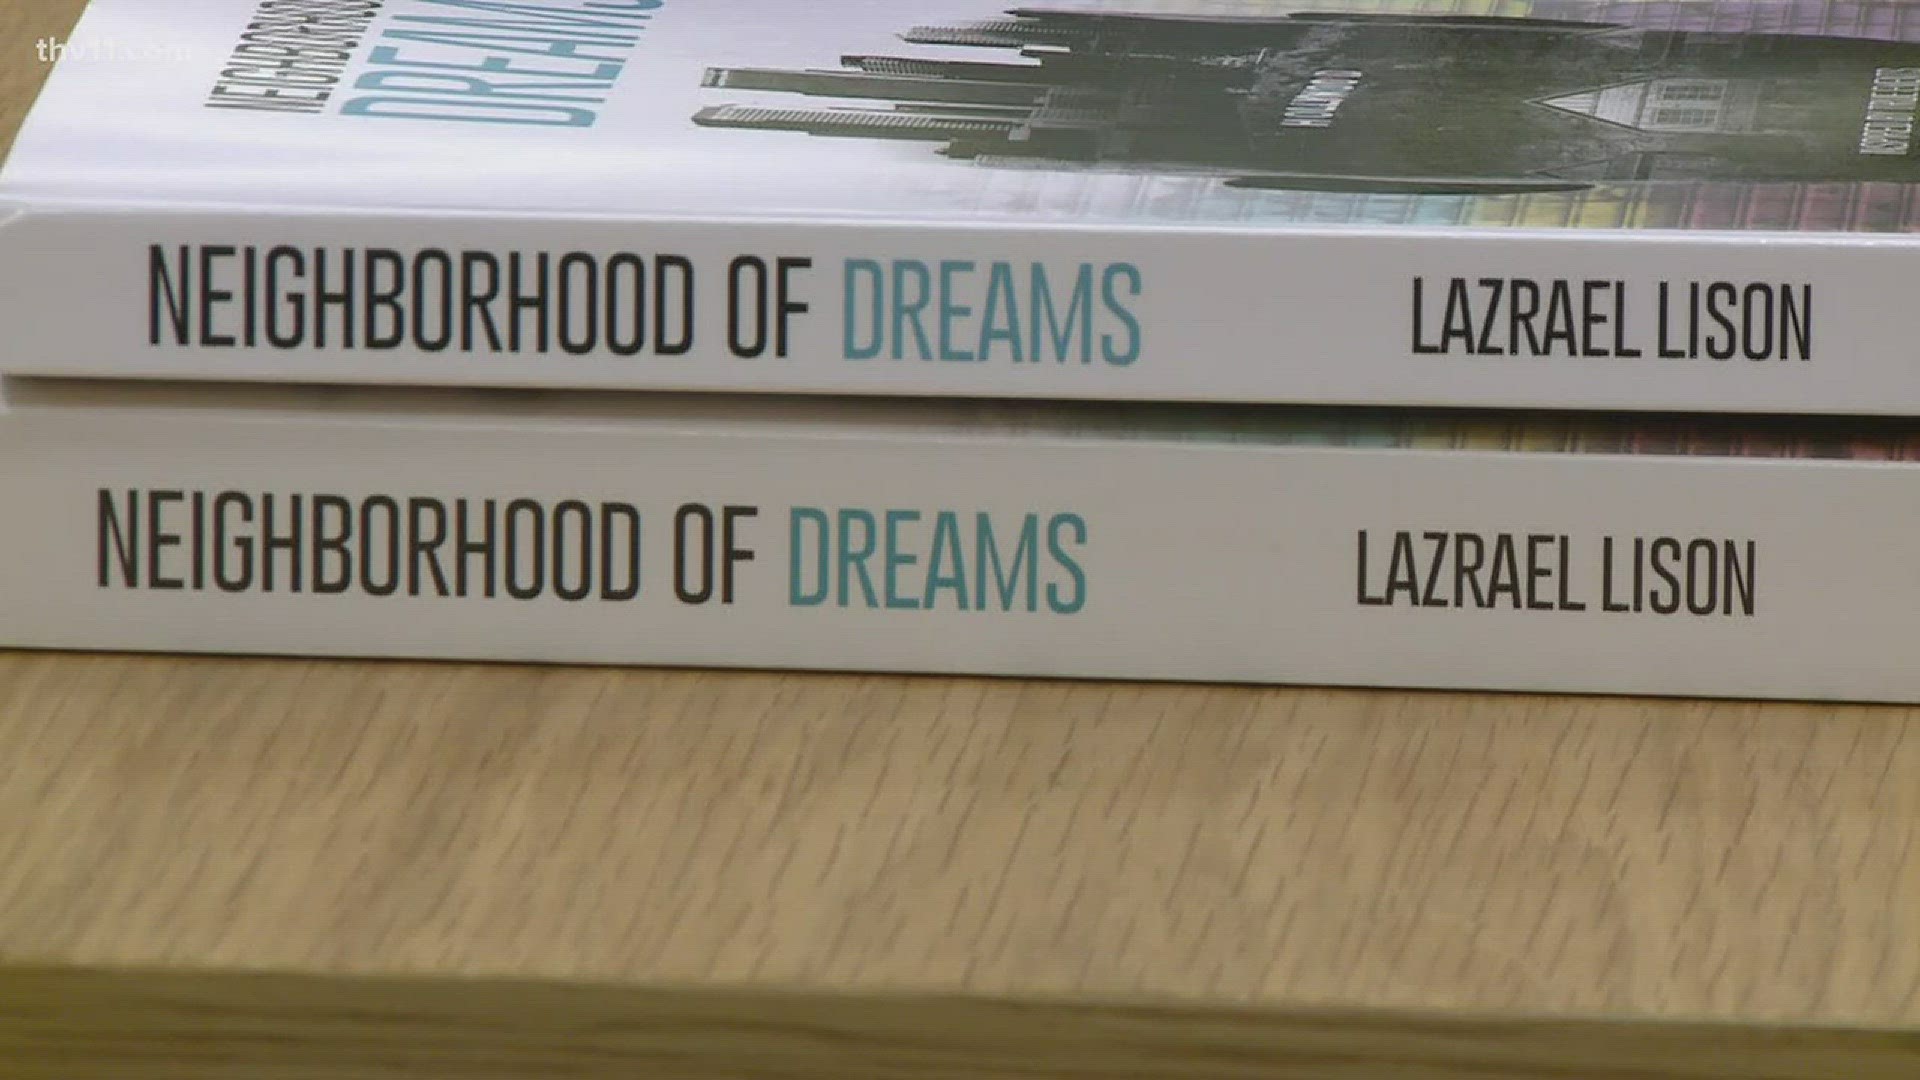 Lazrael Lison, now of Los Angeles, was in Little Rock signing copies of his book, "Neighborhood of Dreams."